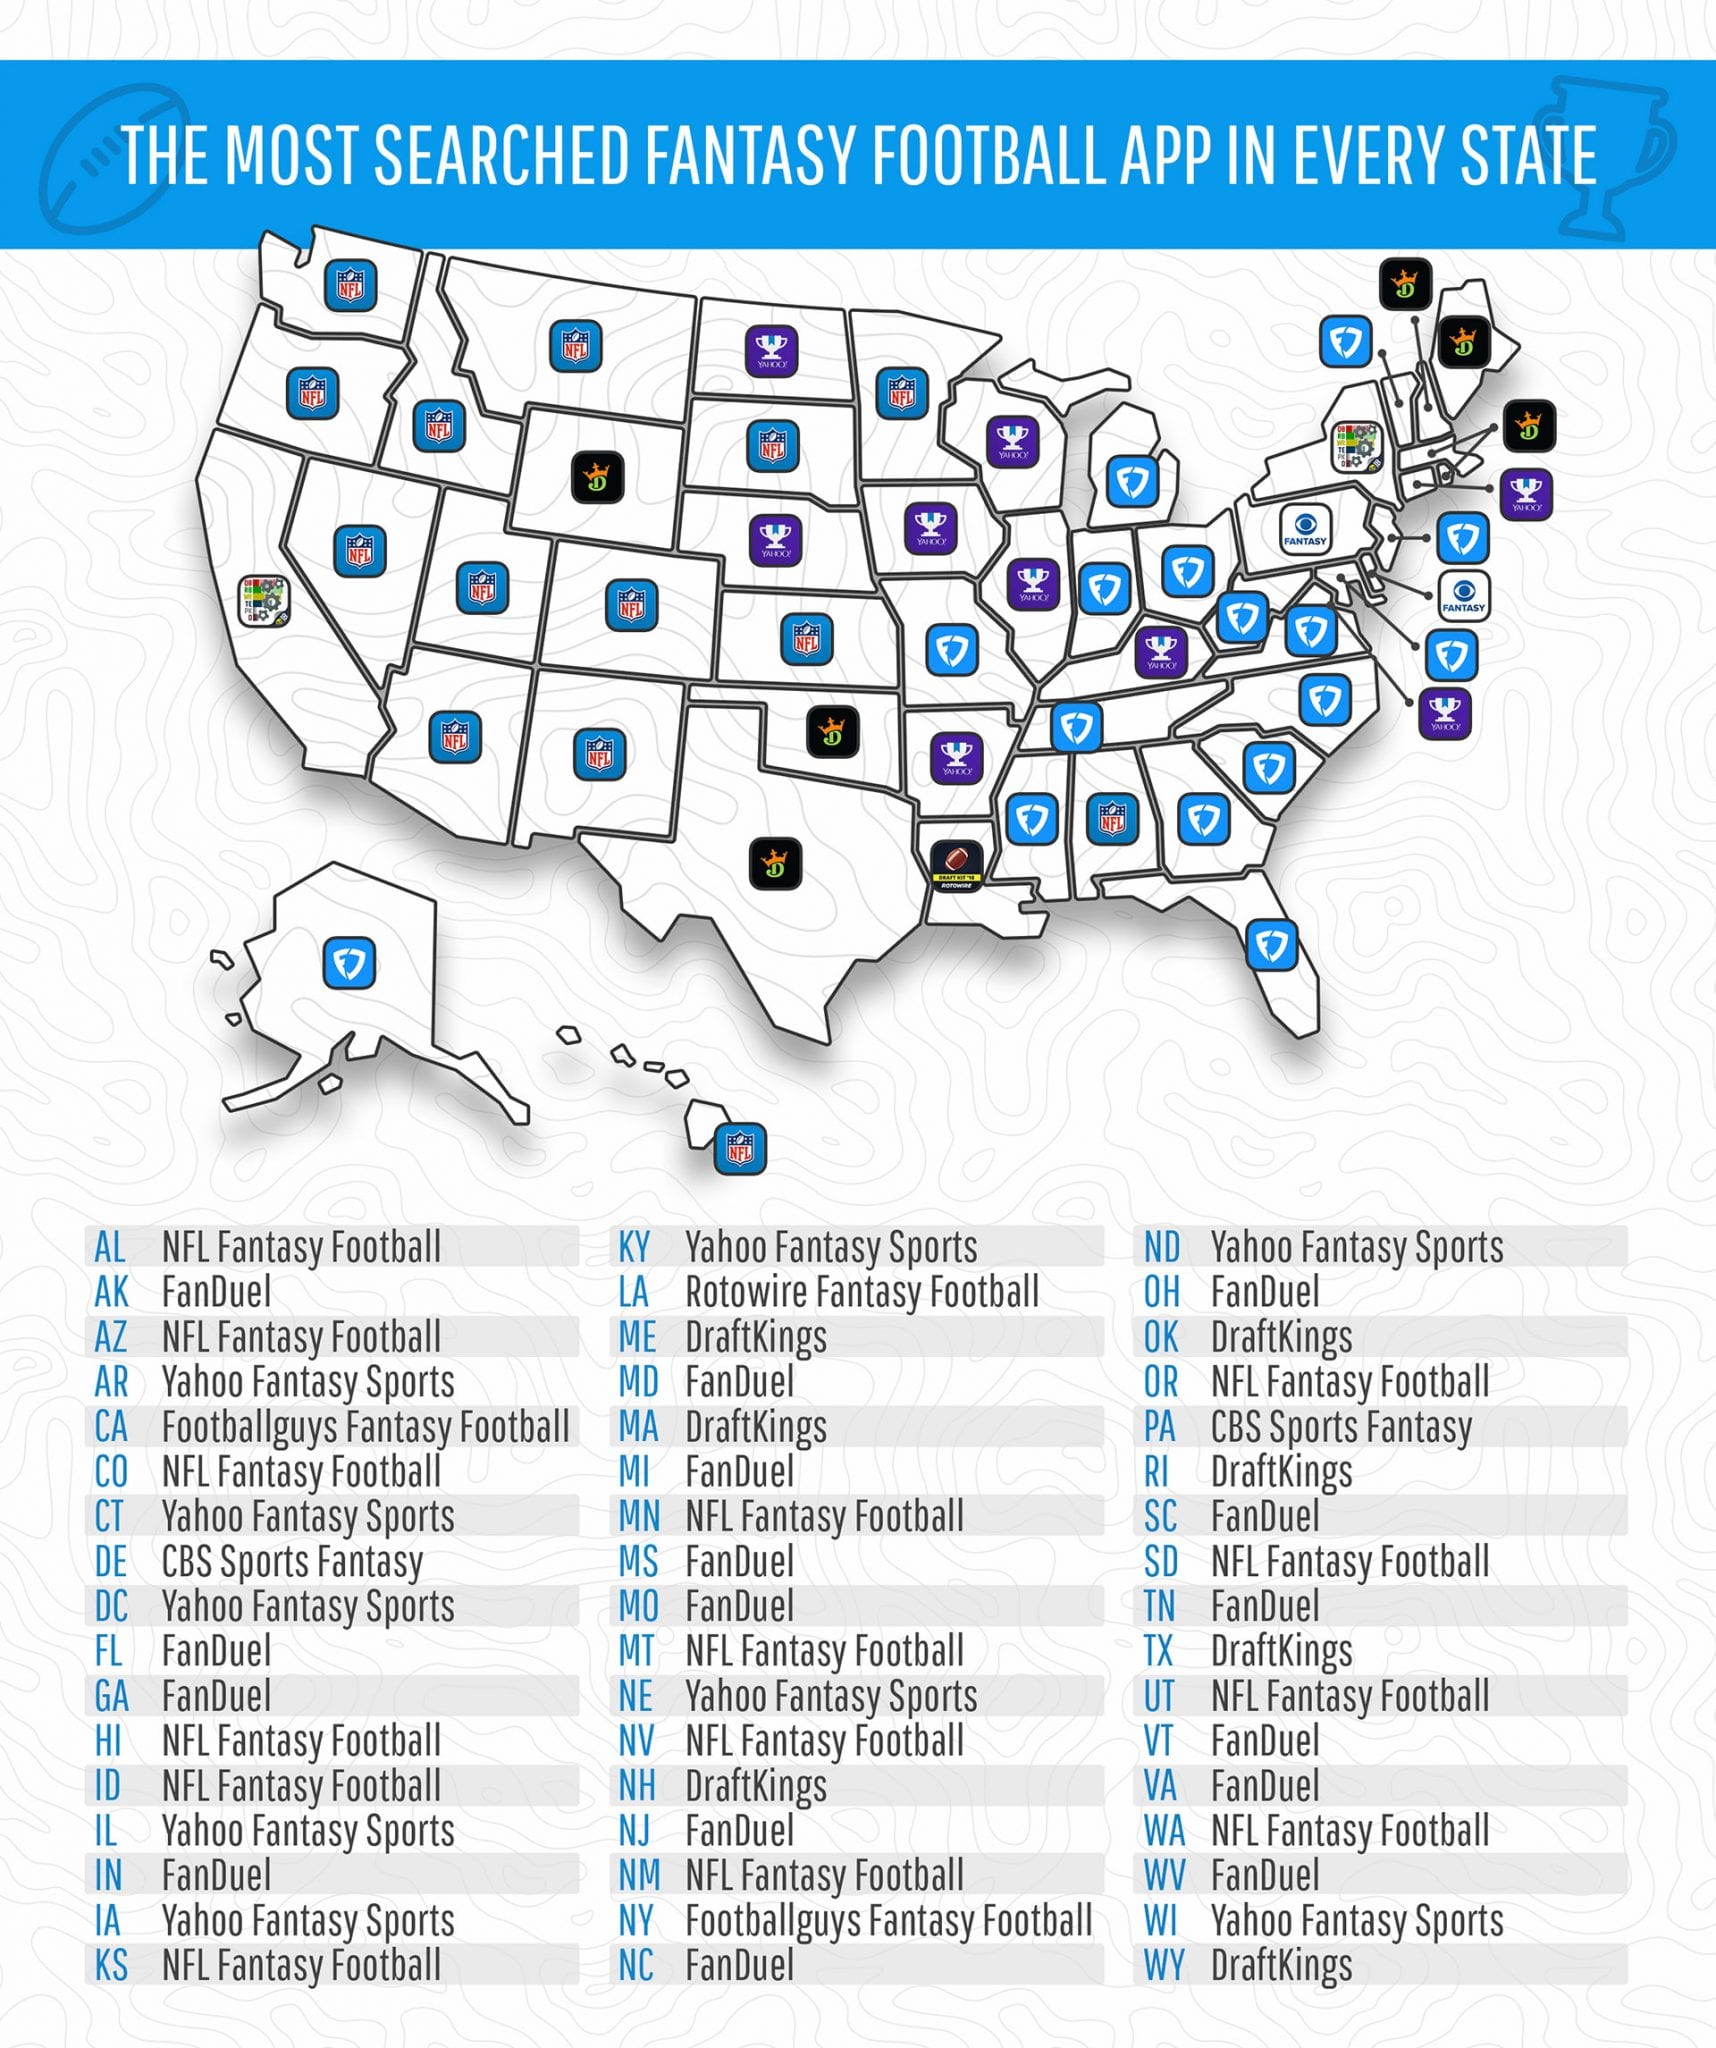 The most searched fantasy football app in every state map